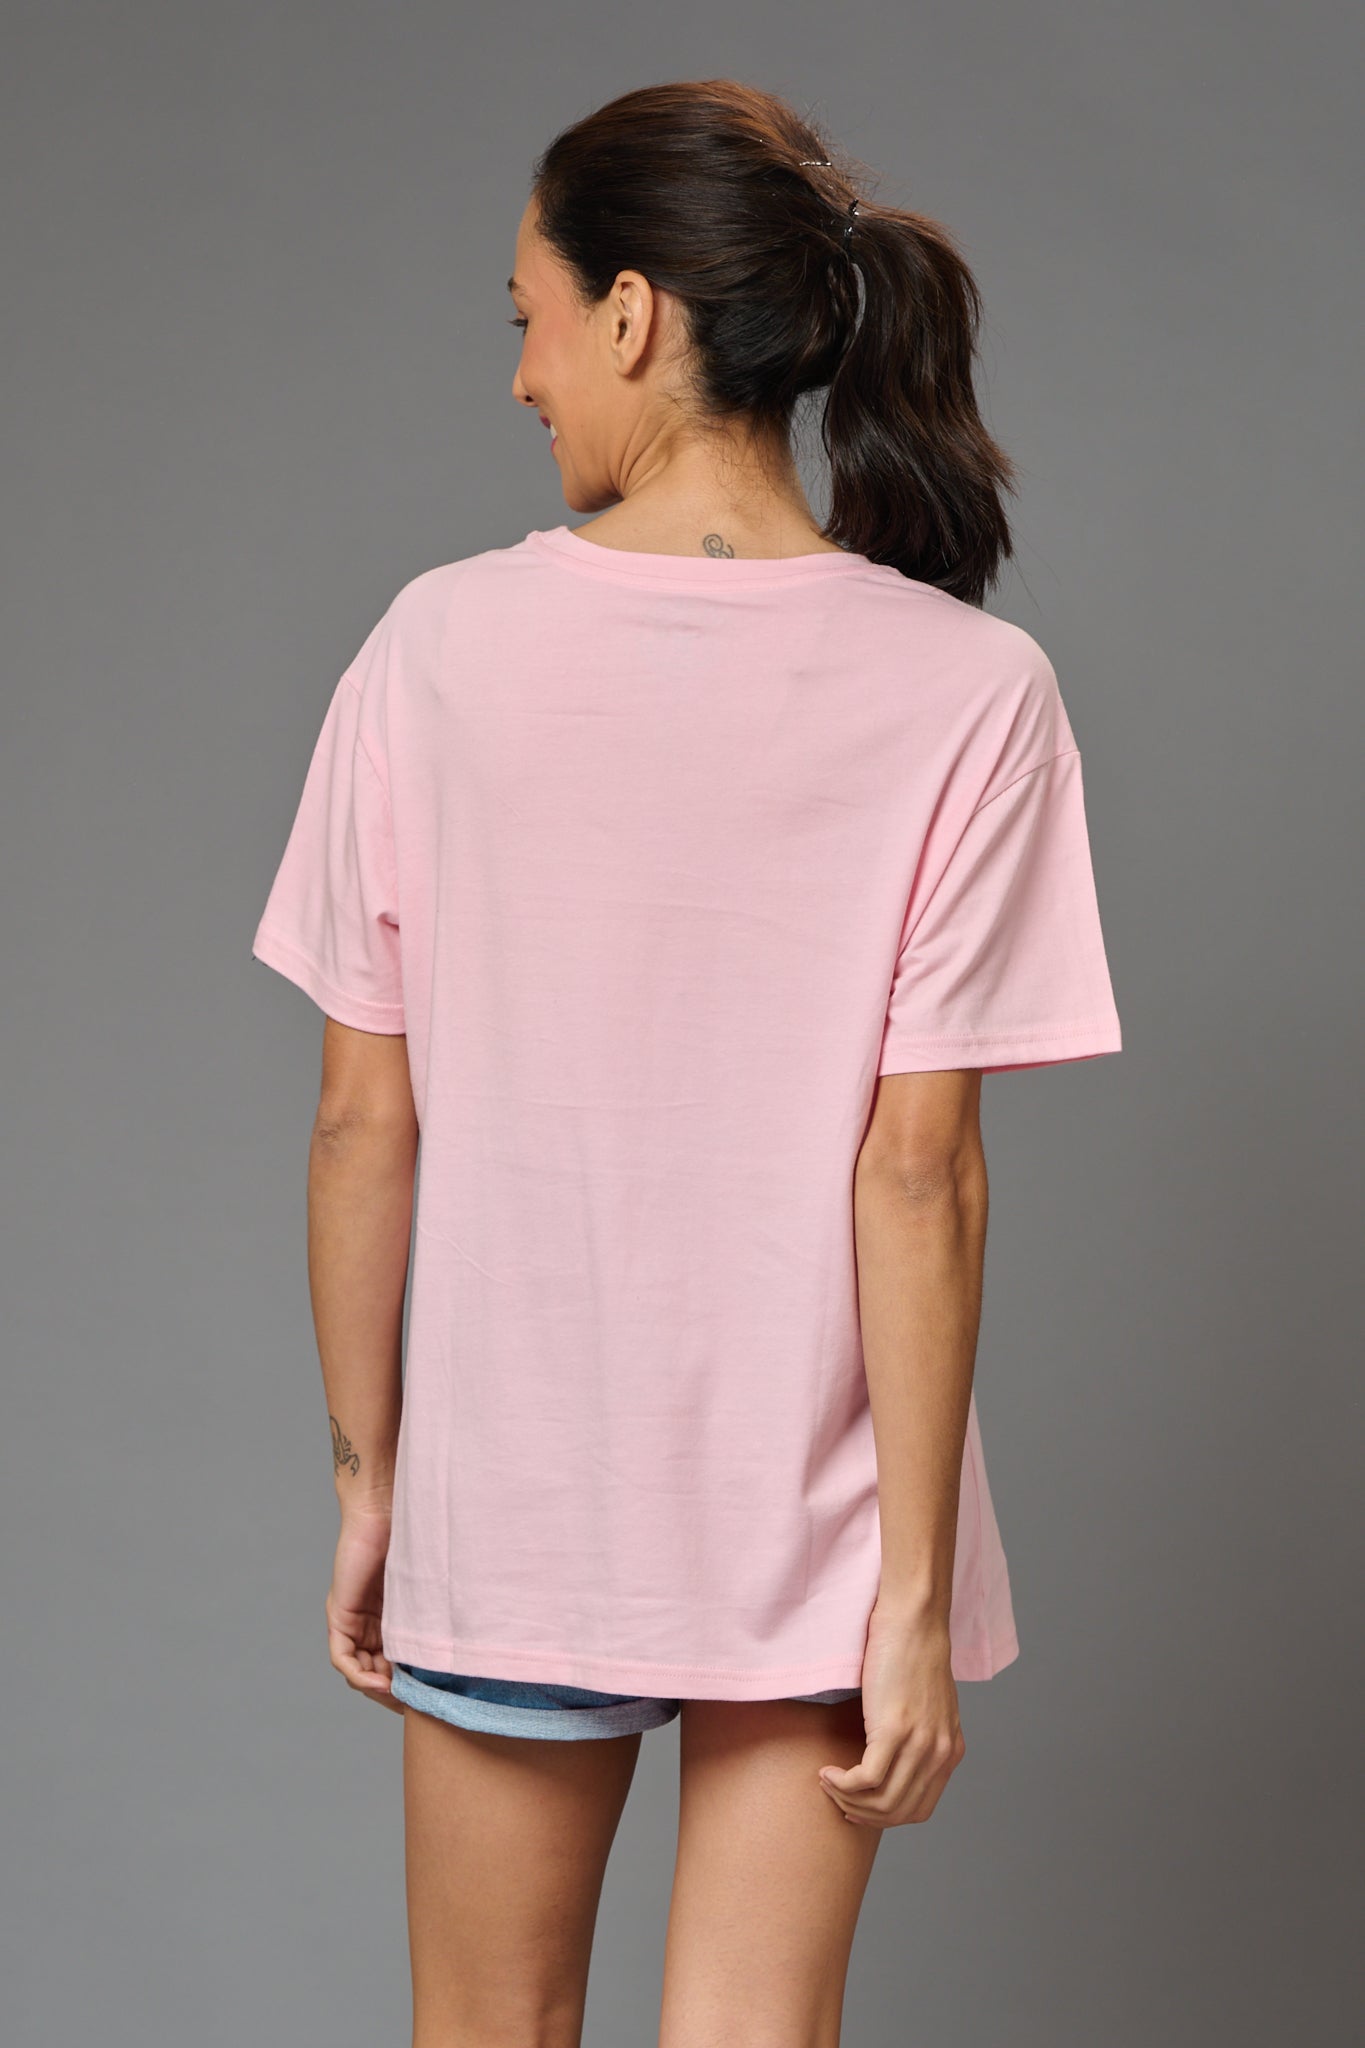 Moody Printed Baby Pink Oversized T-Shirt for Women - Go Devil